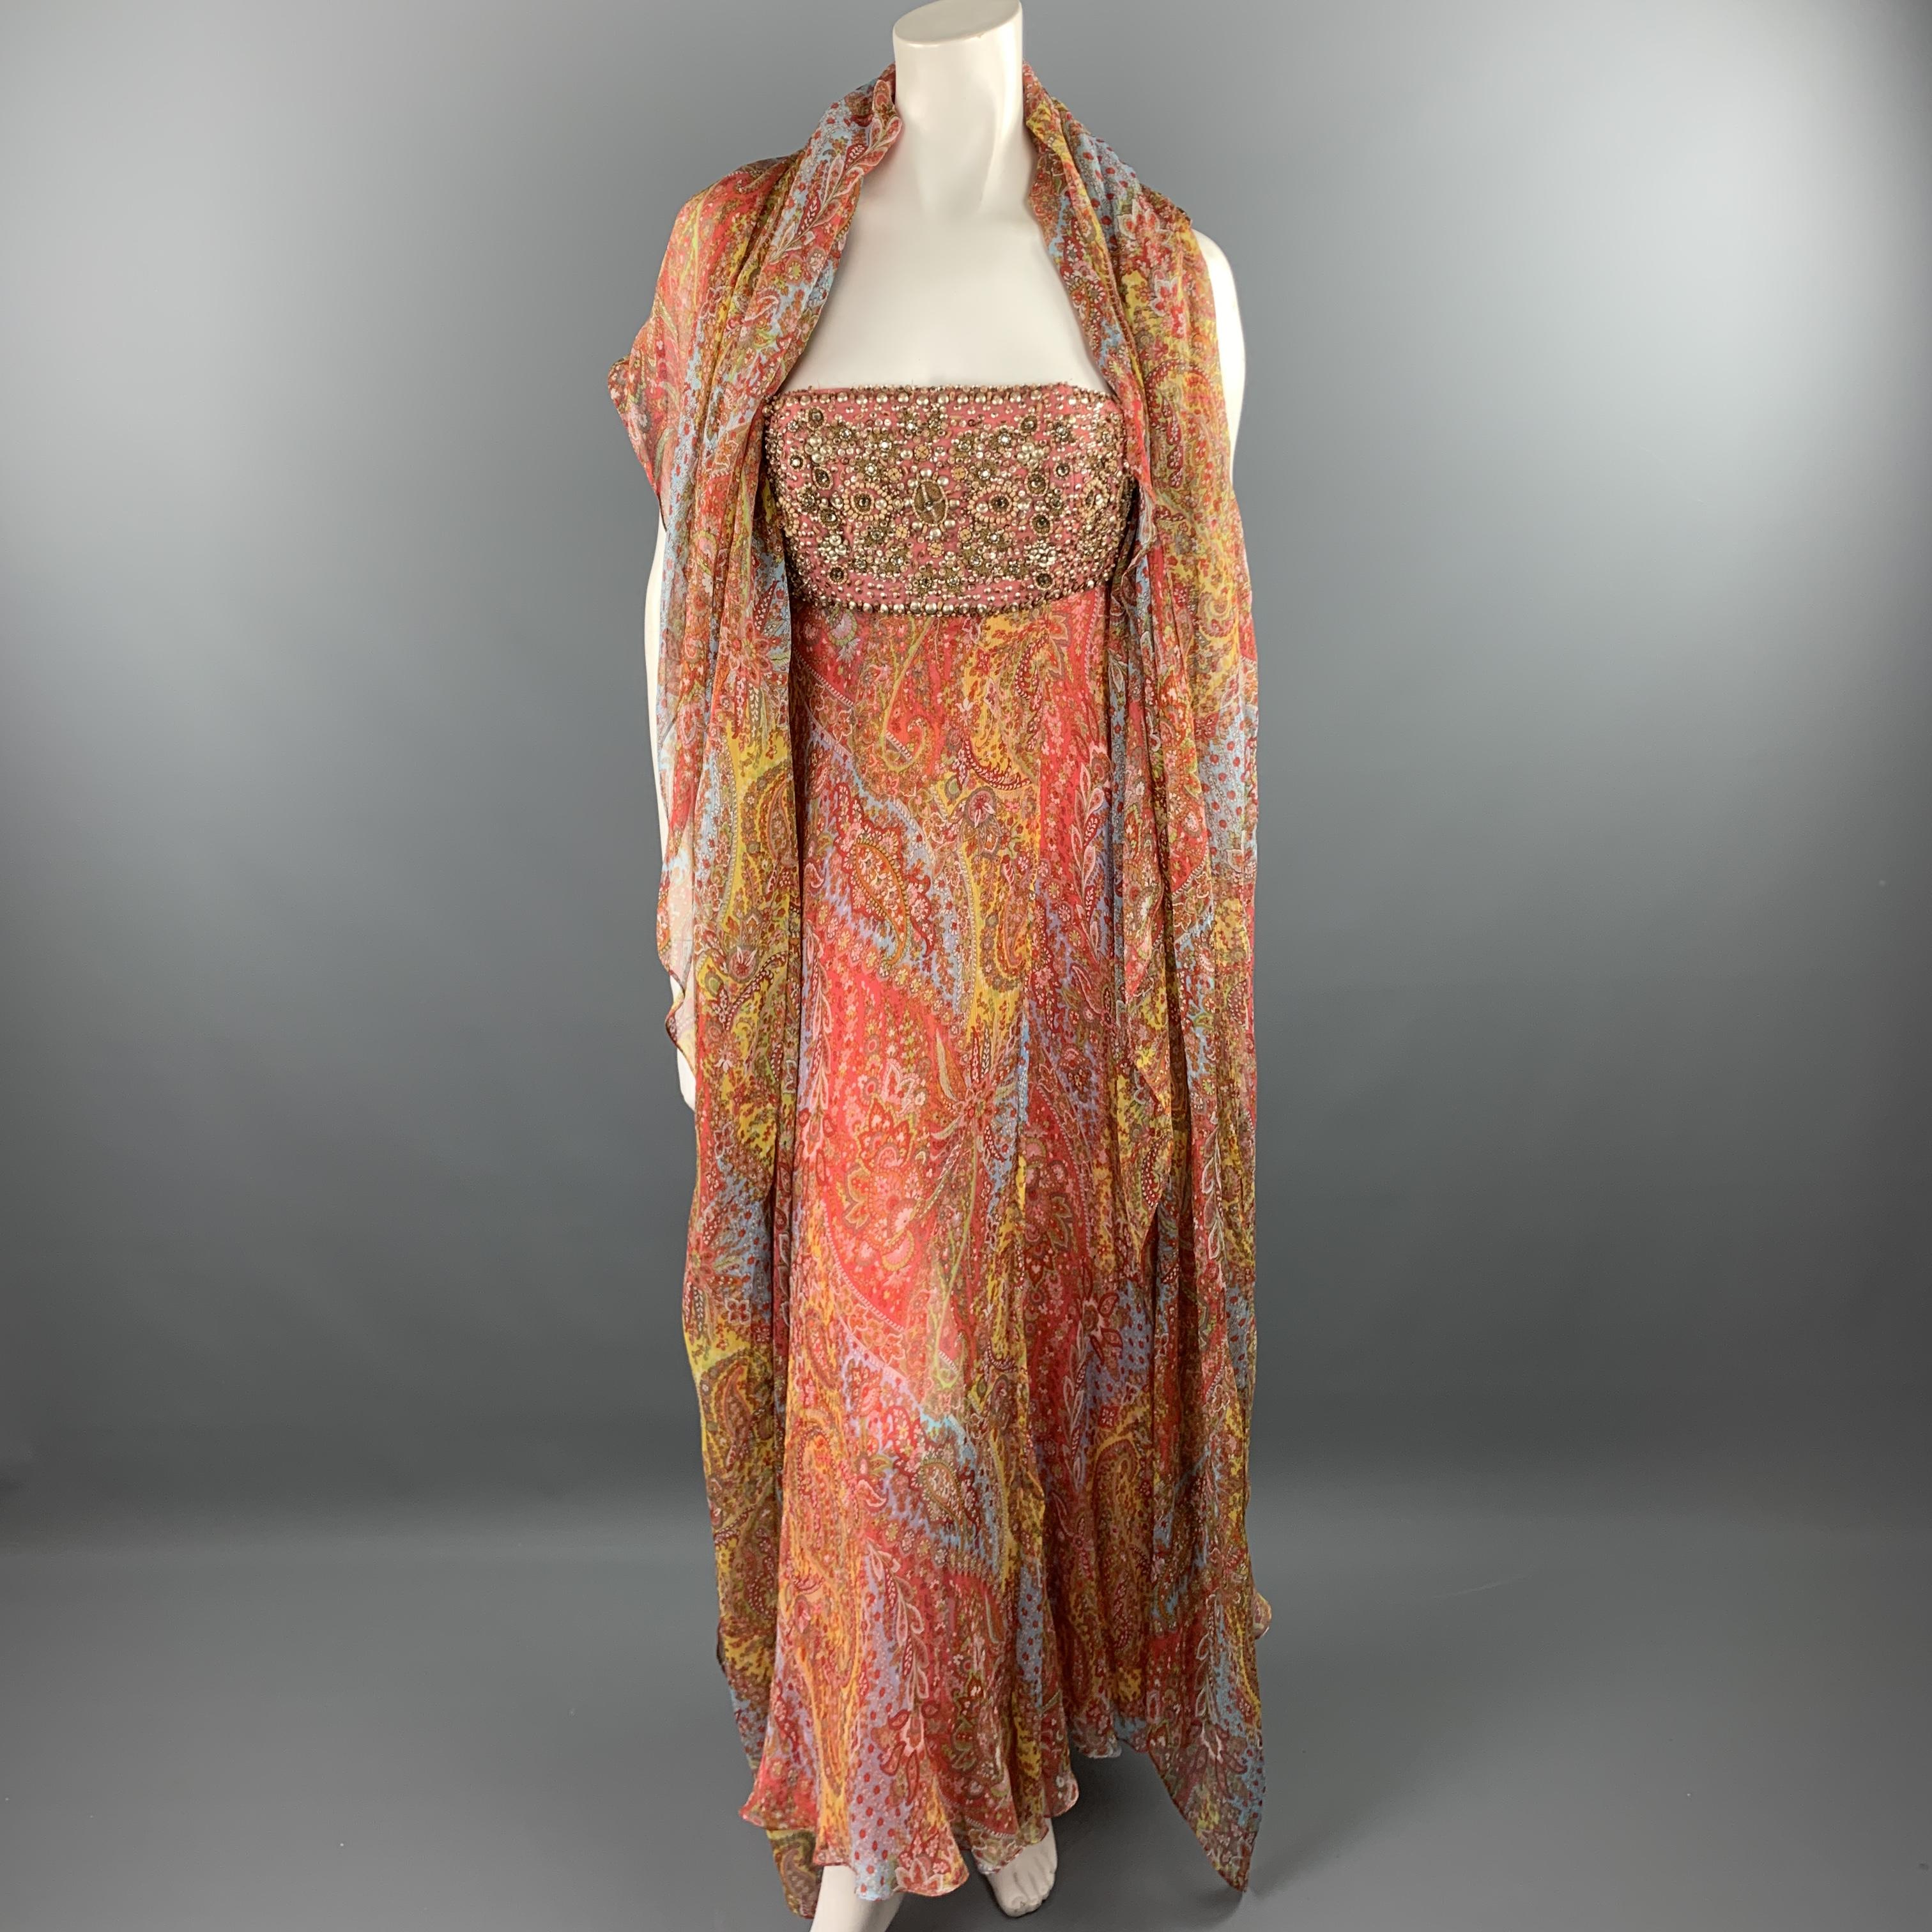 NAEEM KHAN evening gown comes in pink silk with a multi color paisley crepe chiffon overlay, beaded embellished pink silk bustier top, and matching shawl. Made in USA.

Very Good Pre-Owned Condition.
Marked: US 6

Measurements:

Bust: 34 in.
Waist: